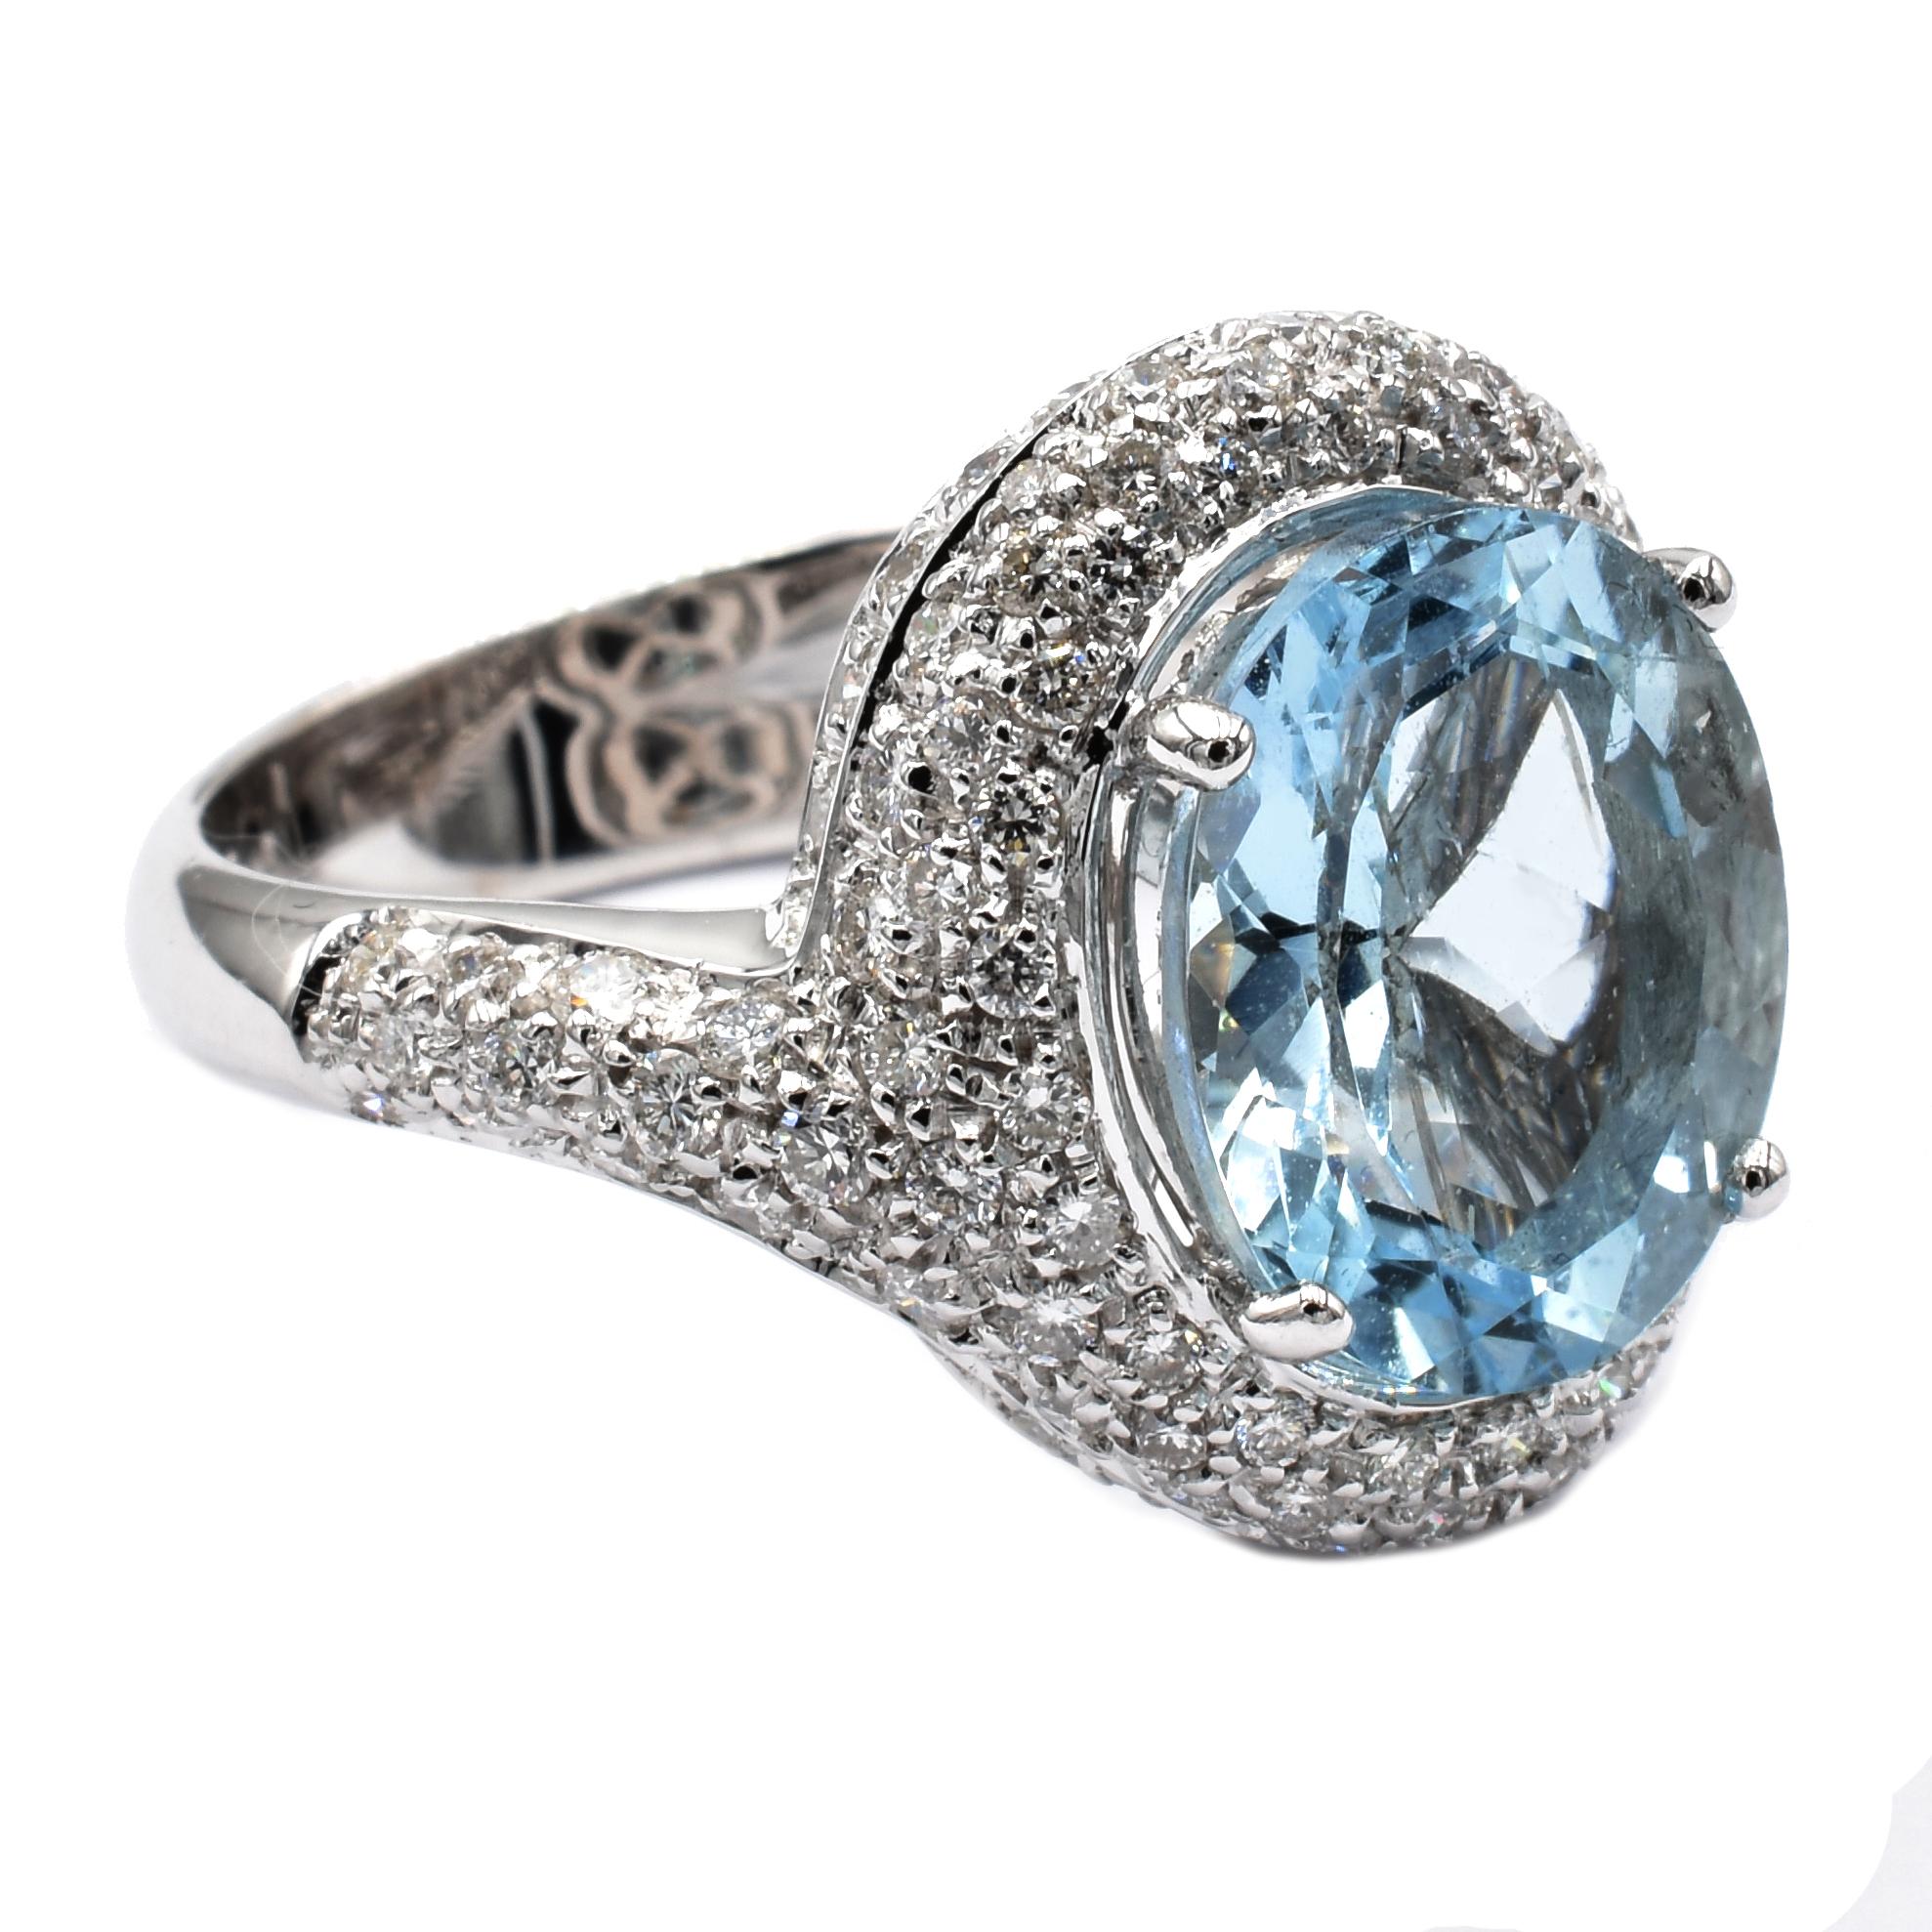 Gilberto Cassola Oval Shaped Aquamarine and Diamonds Gold Ring Made in Italy For Sale 3